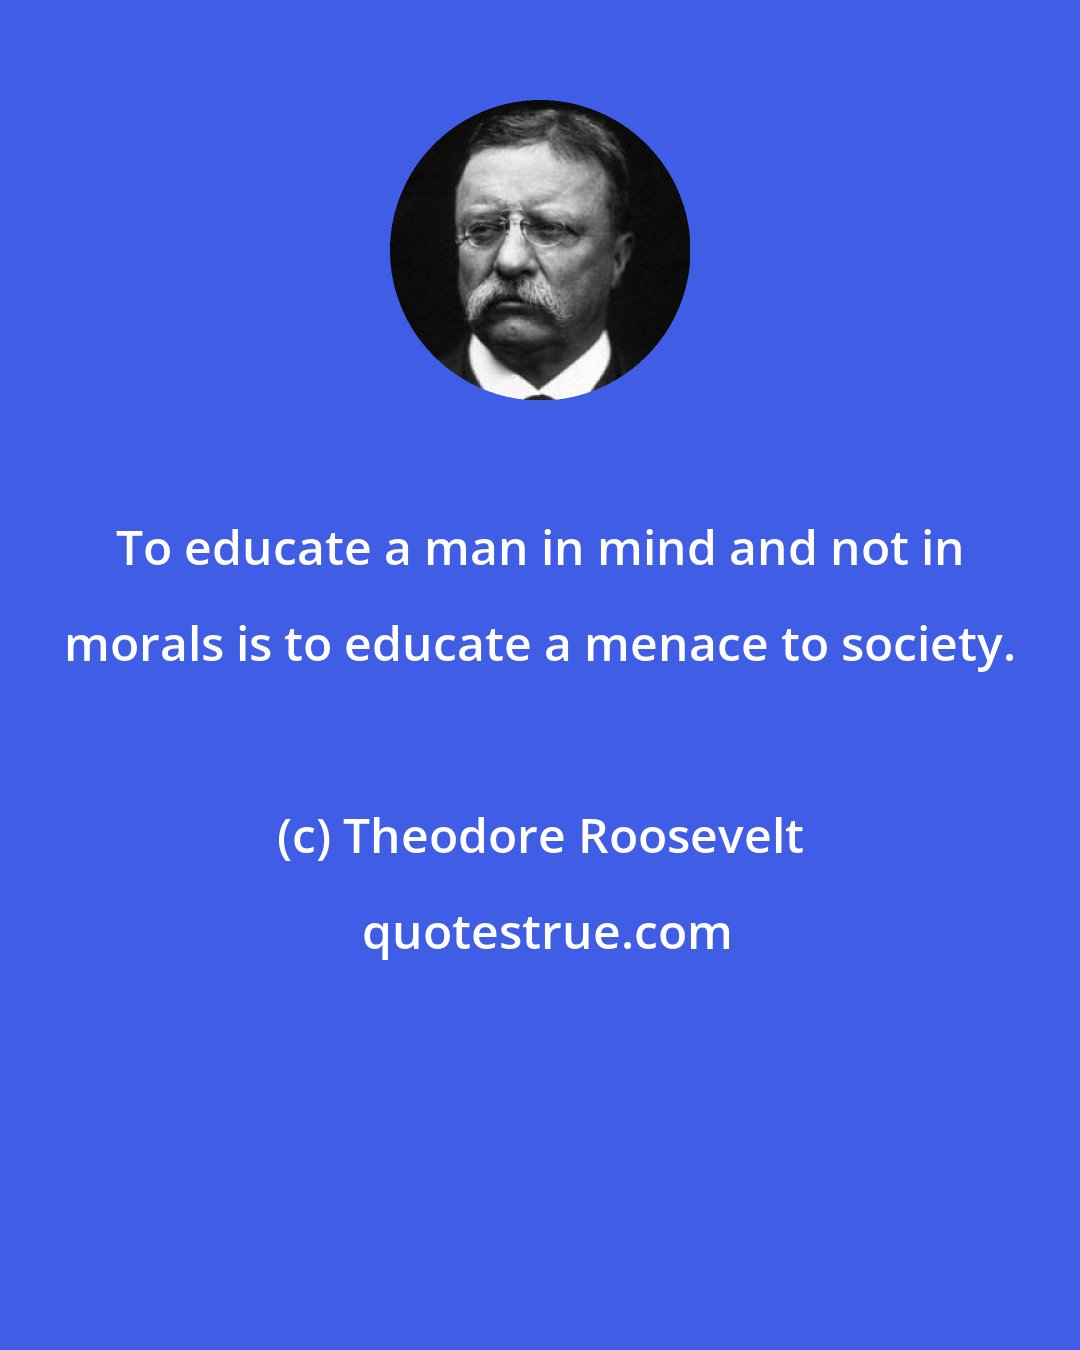 Theodore Roosevelt: To educate a man in mind and not in morals is to educate a menace to society.